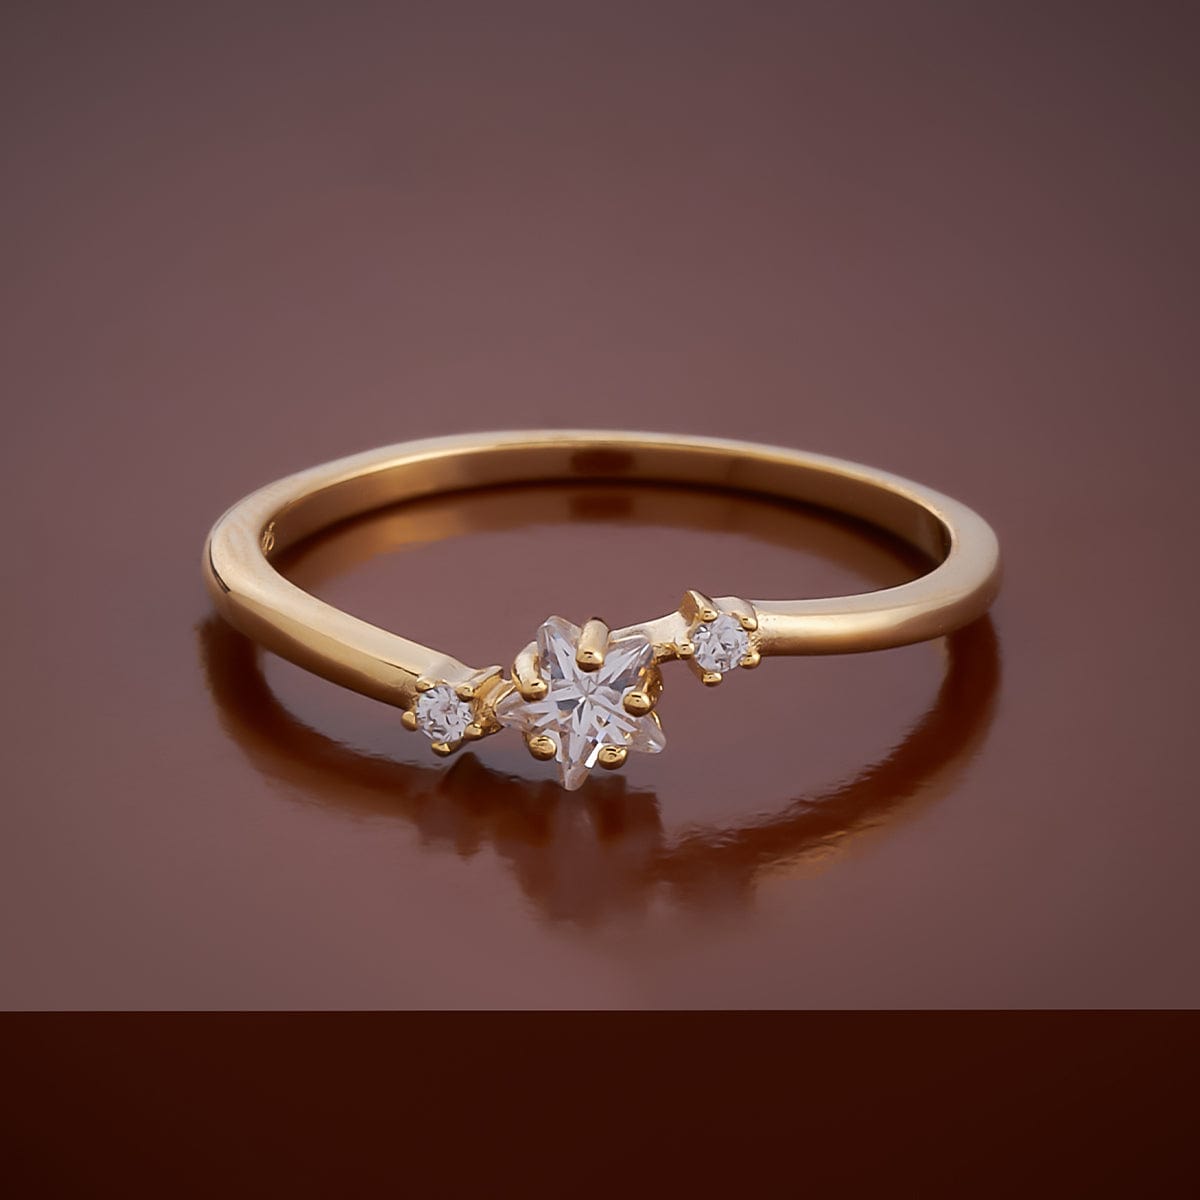 Stunning Cocktail Look Multi-Stone Ring